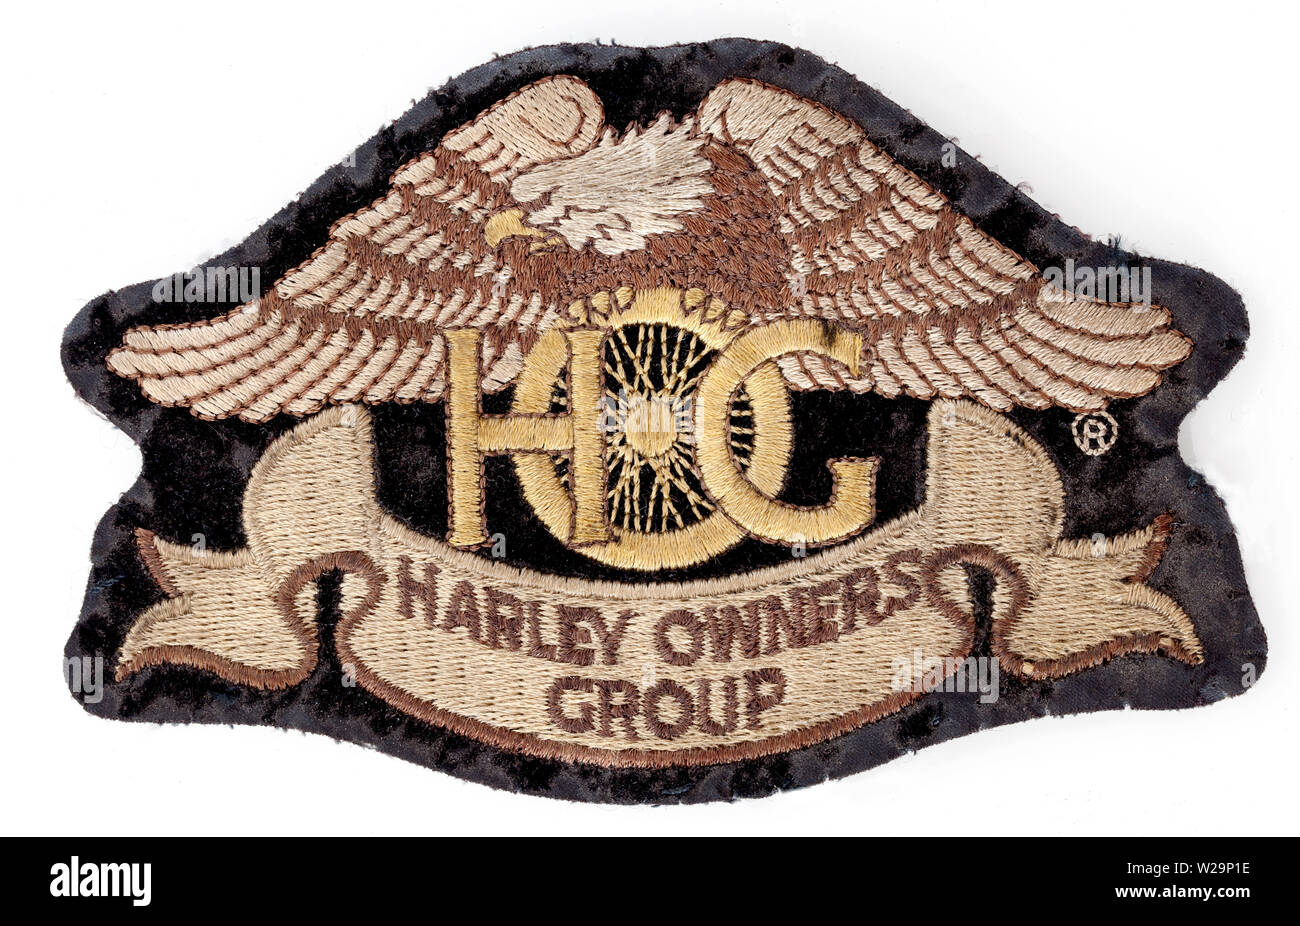 Vintage Harley Davidson Motorcycles Harley Owners Group 'HOG' Patch Stock Photo